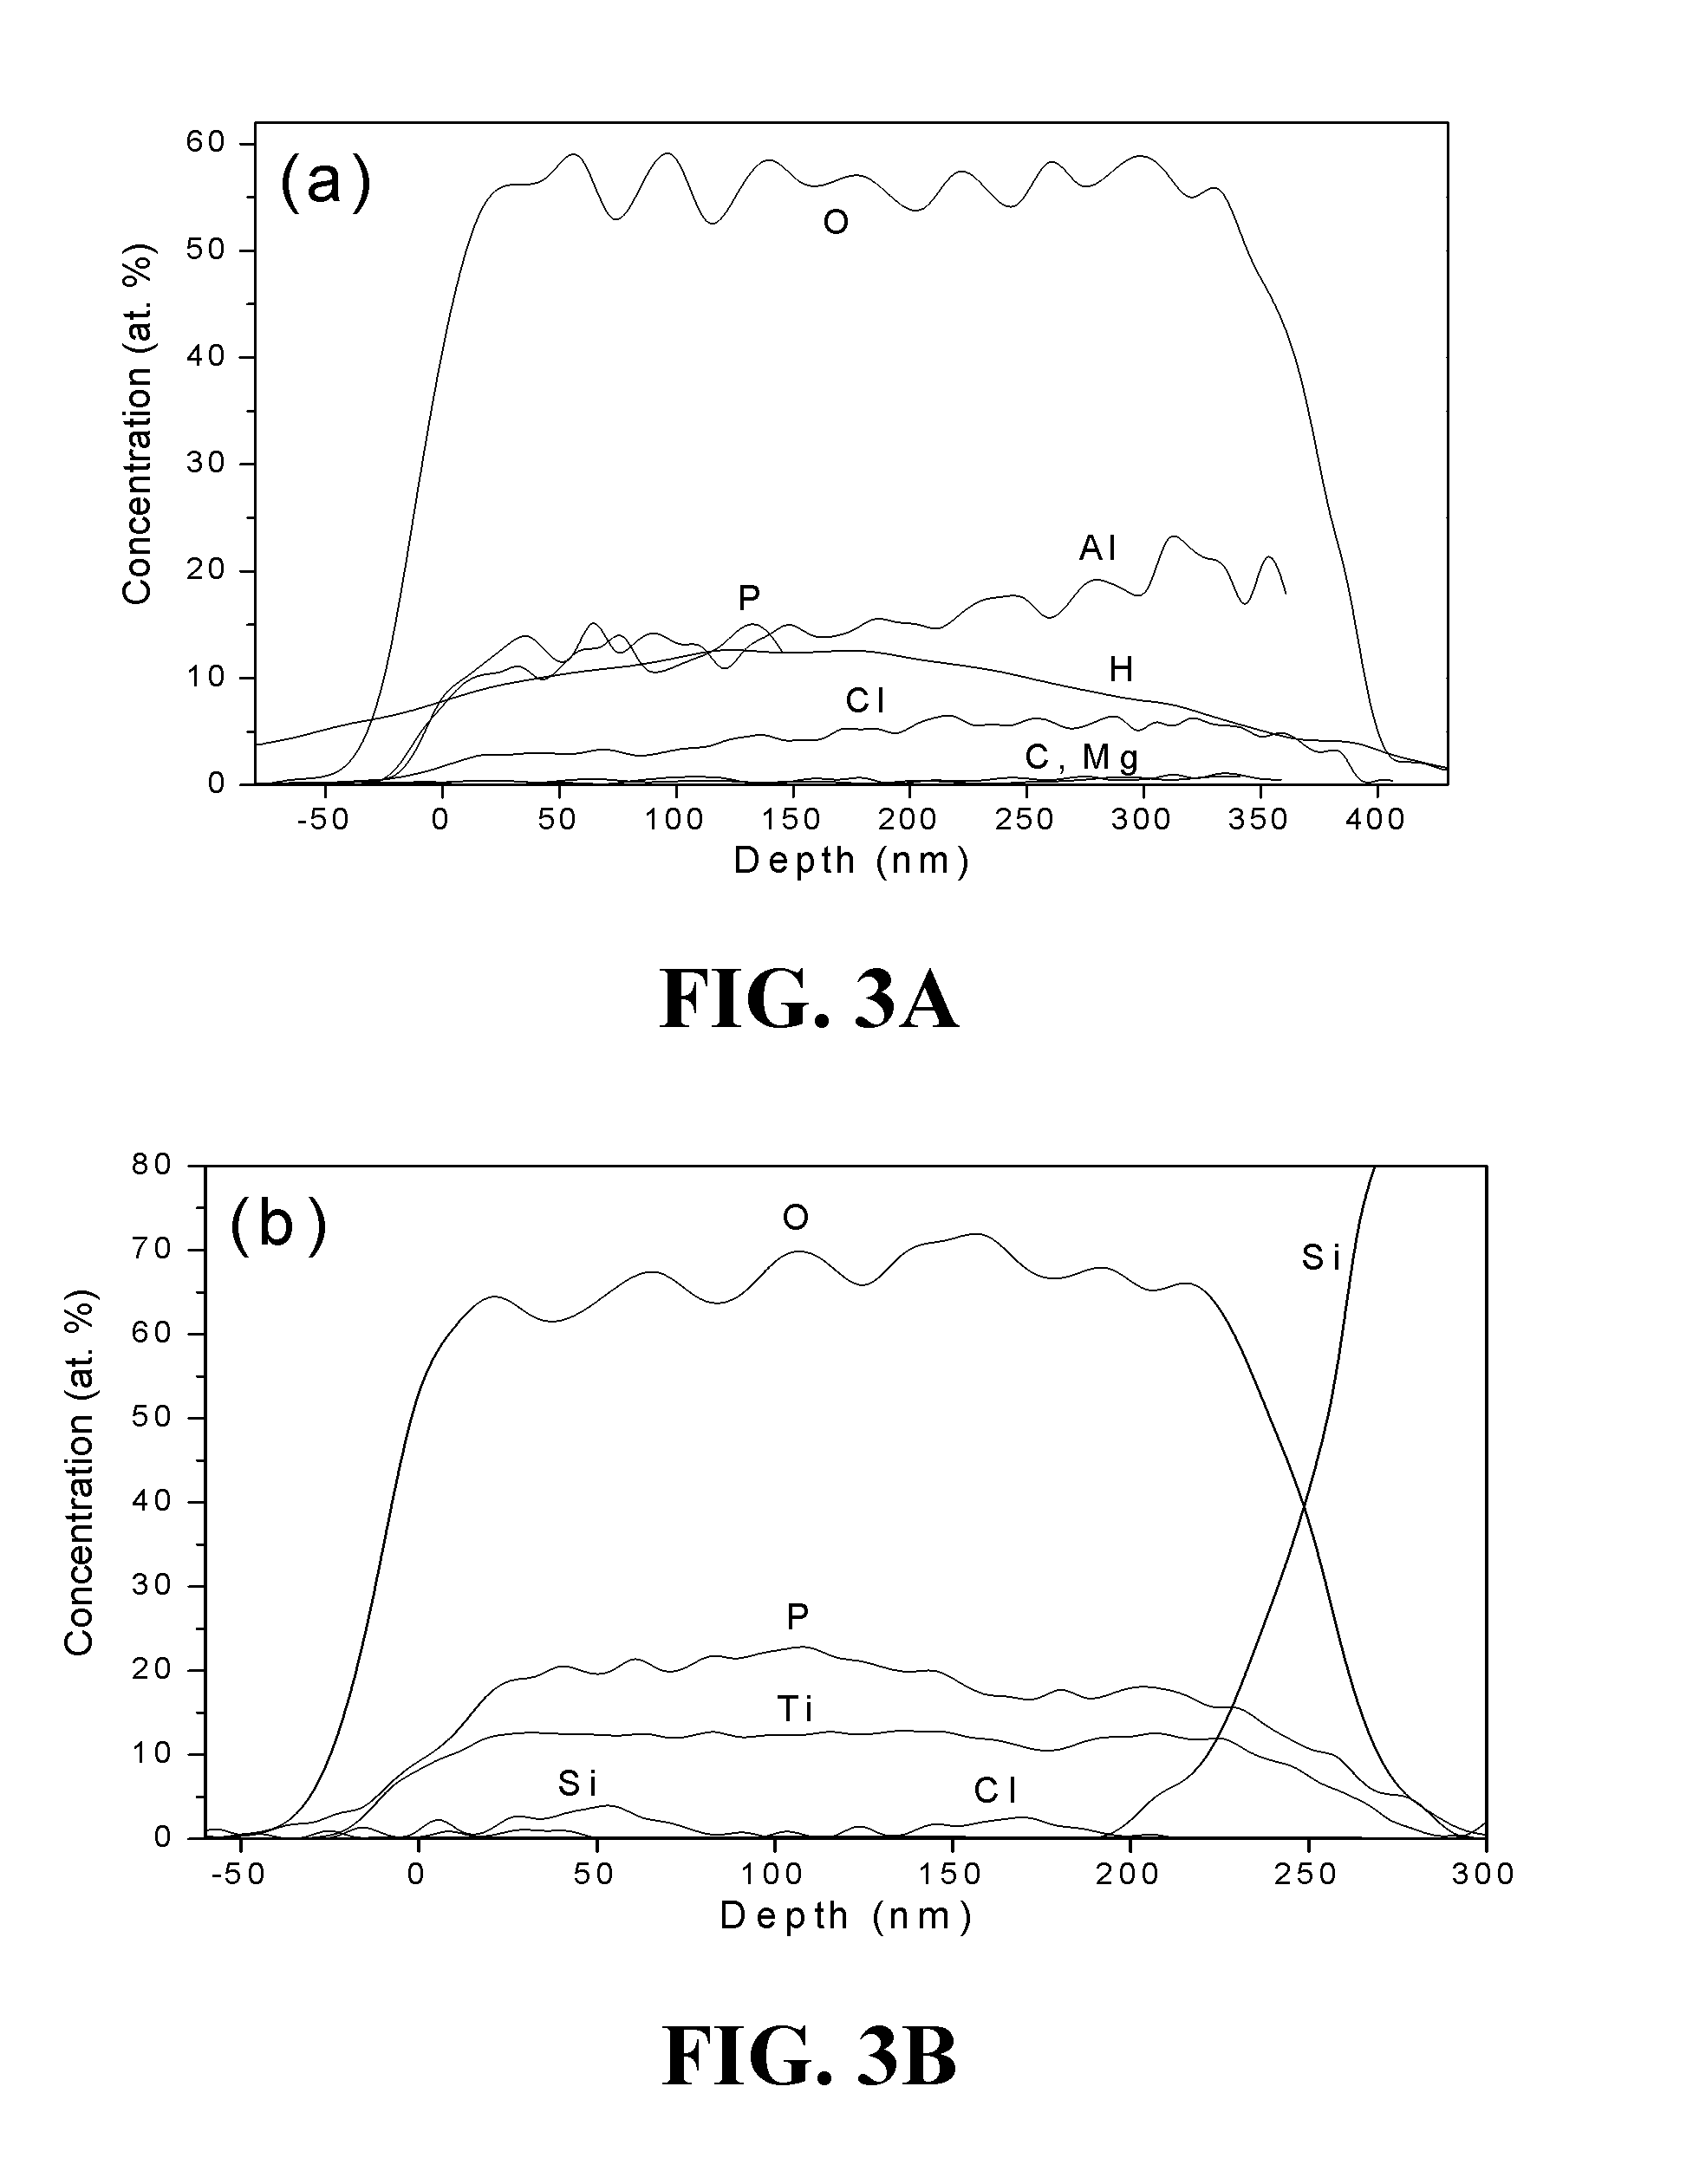 Atomic layer deposition of metal phosphates and lithium silicates